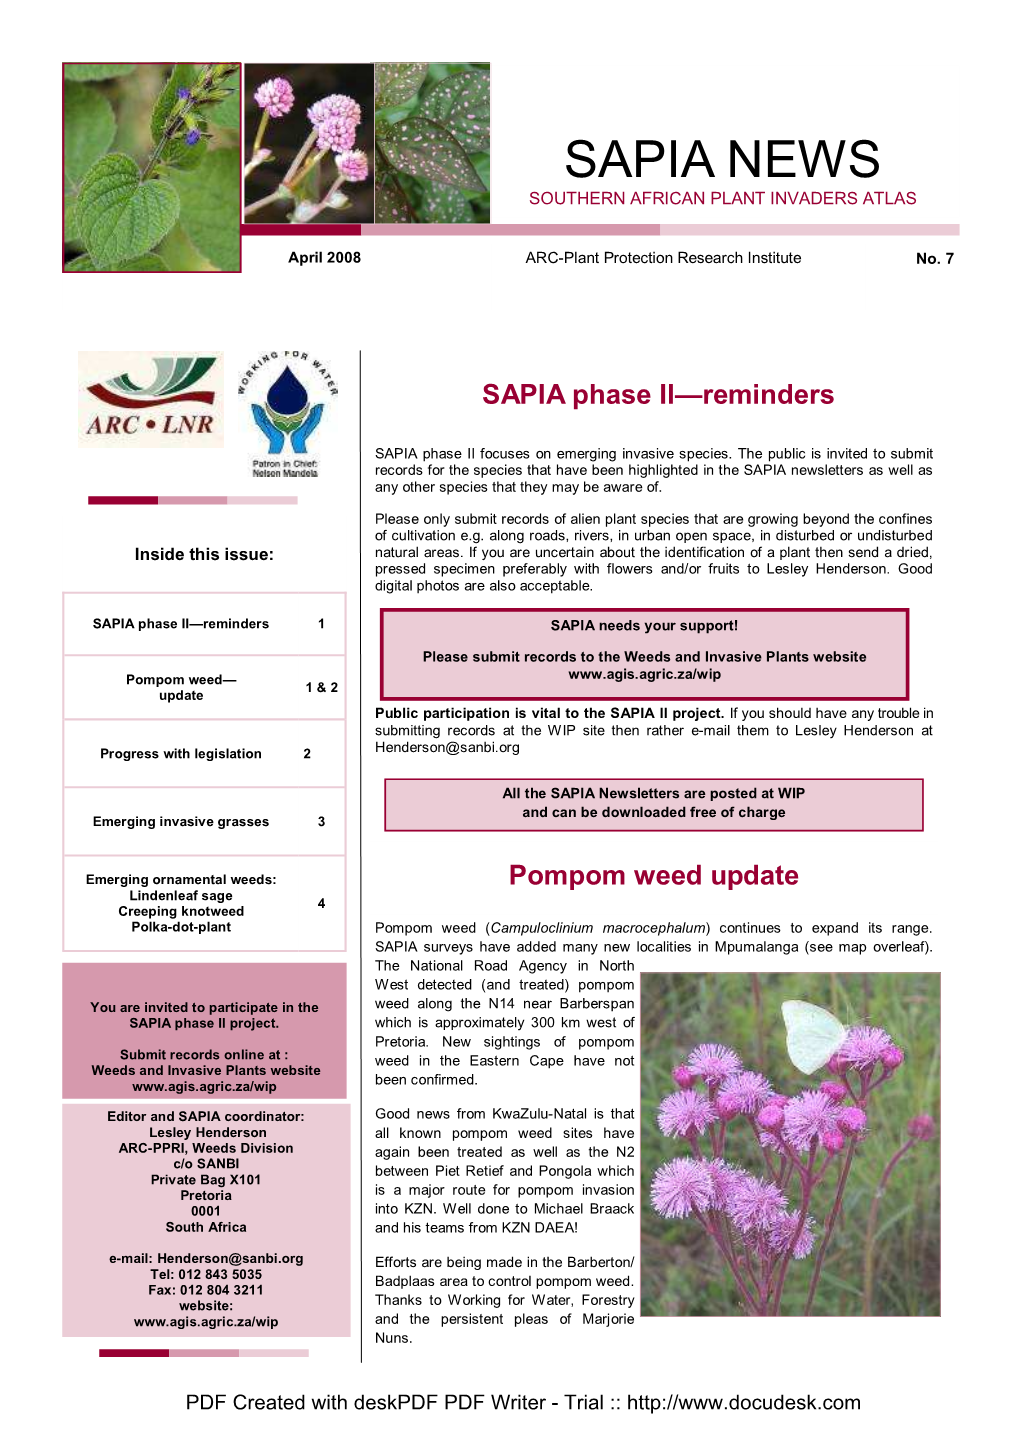 SAPIA Newsletters Are Posted at WIP and Can Be Downloaded Free of Charge Emerging Invasive Grasses 3